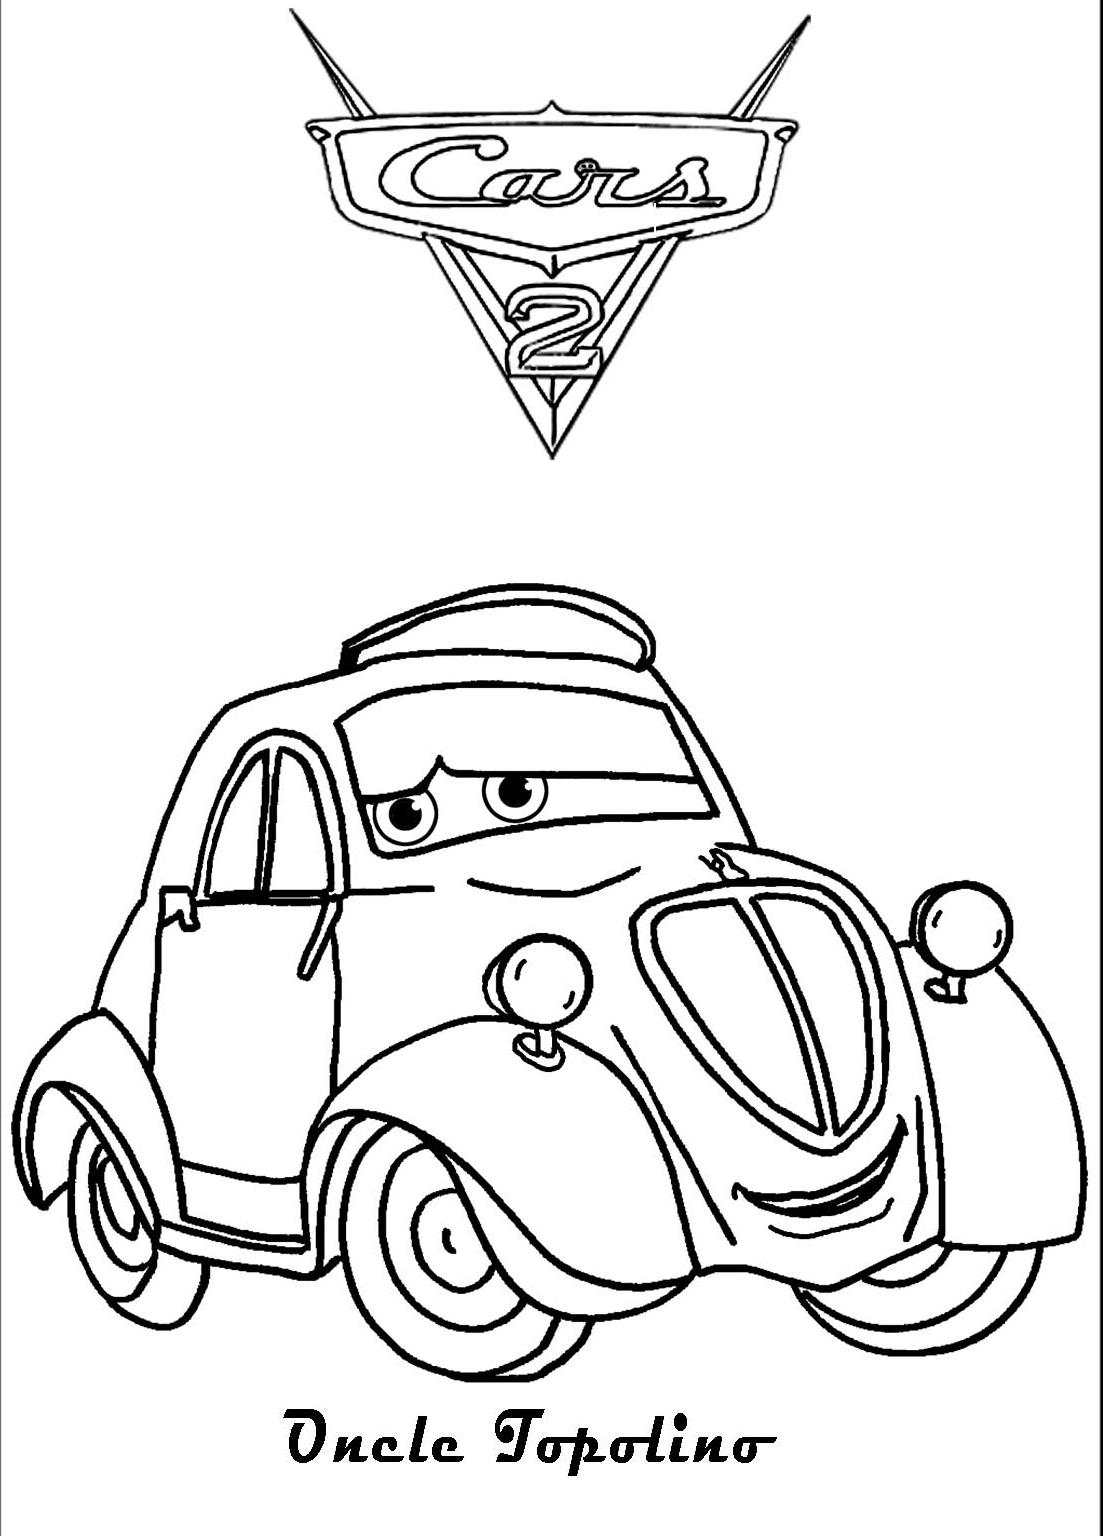 uncle coloring pages - photo #35